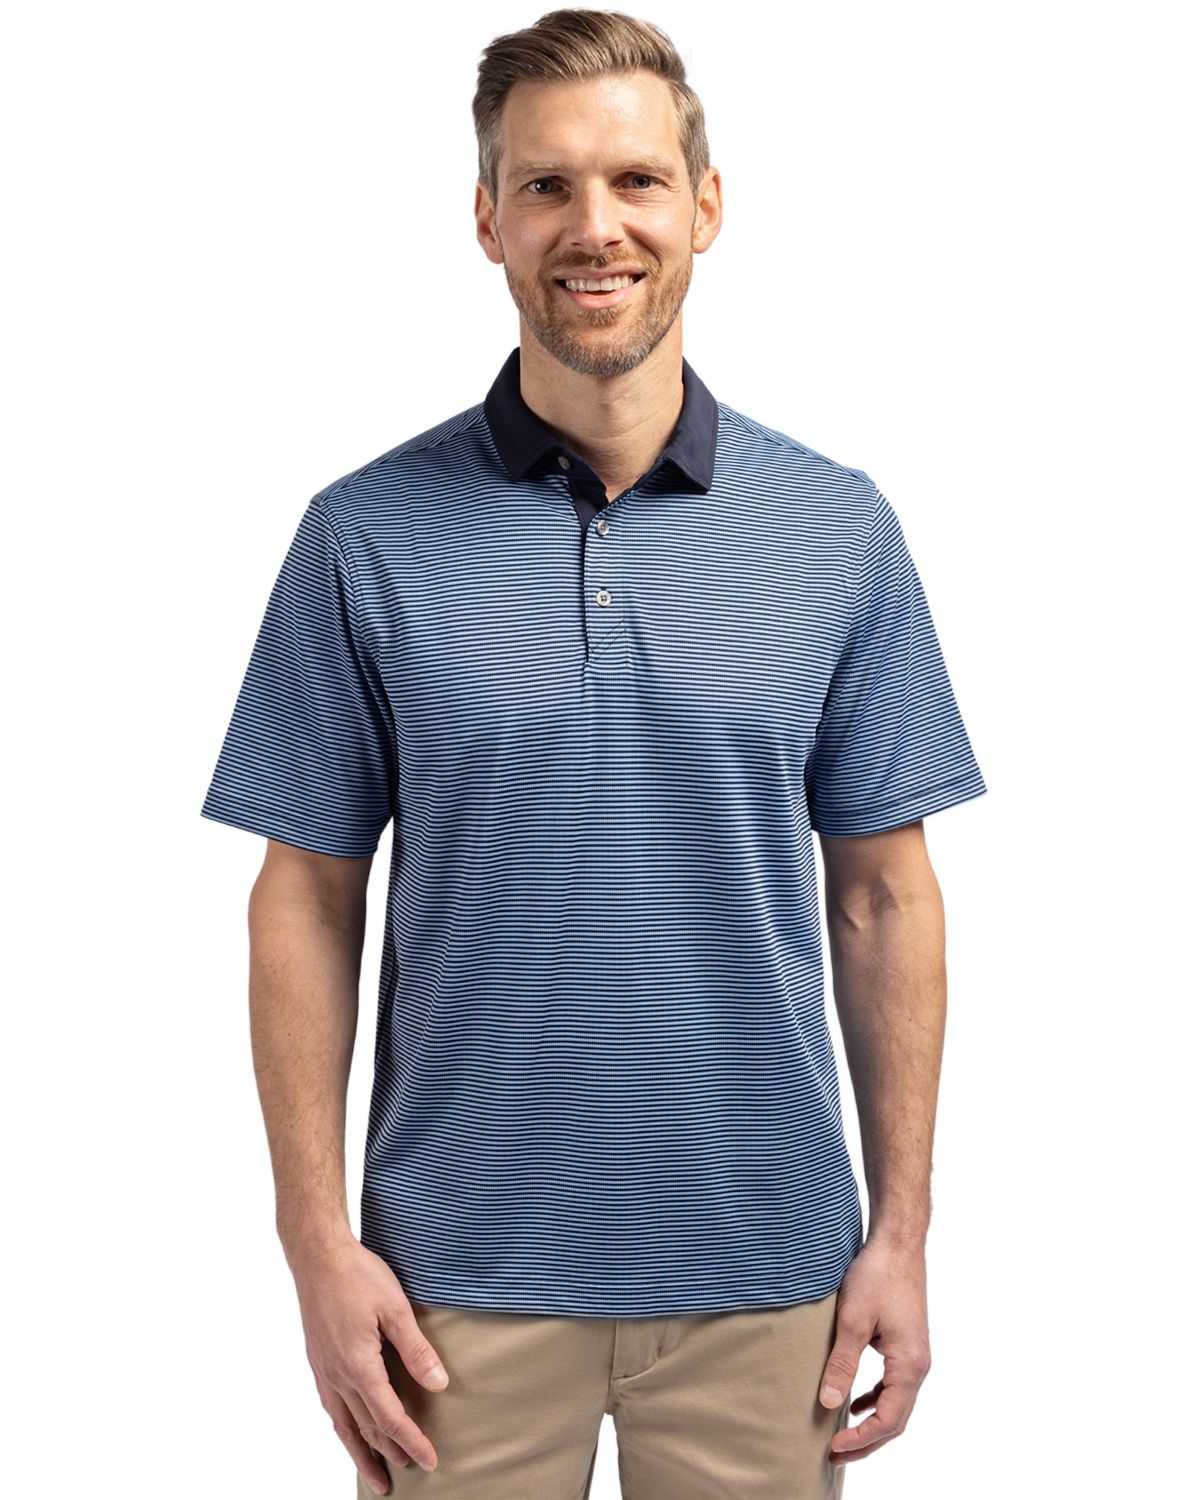 Men's Cutter Buck Virtue Eco Pique Micro Stripe Recycled Polo - Polished/w